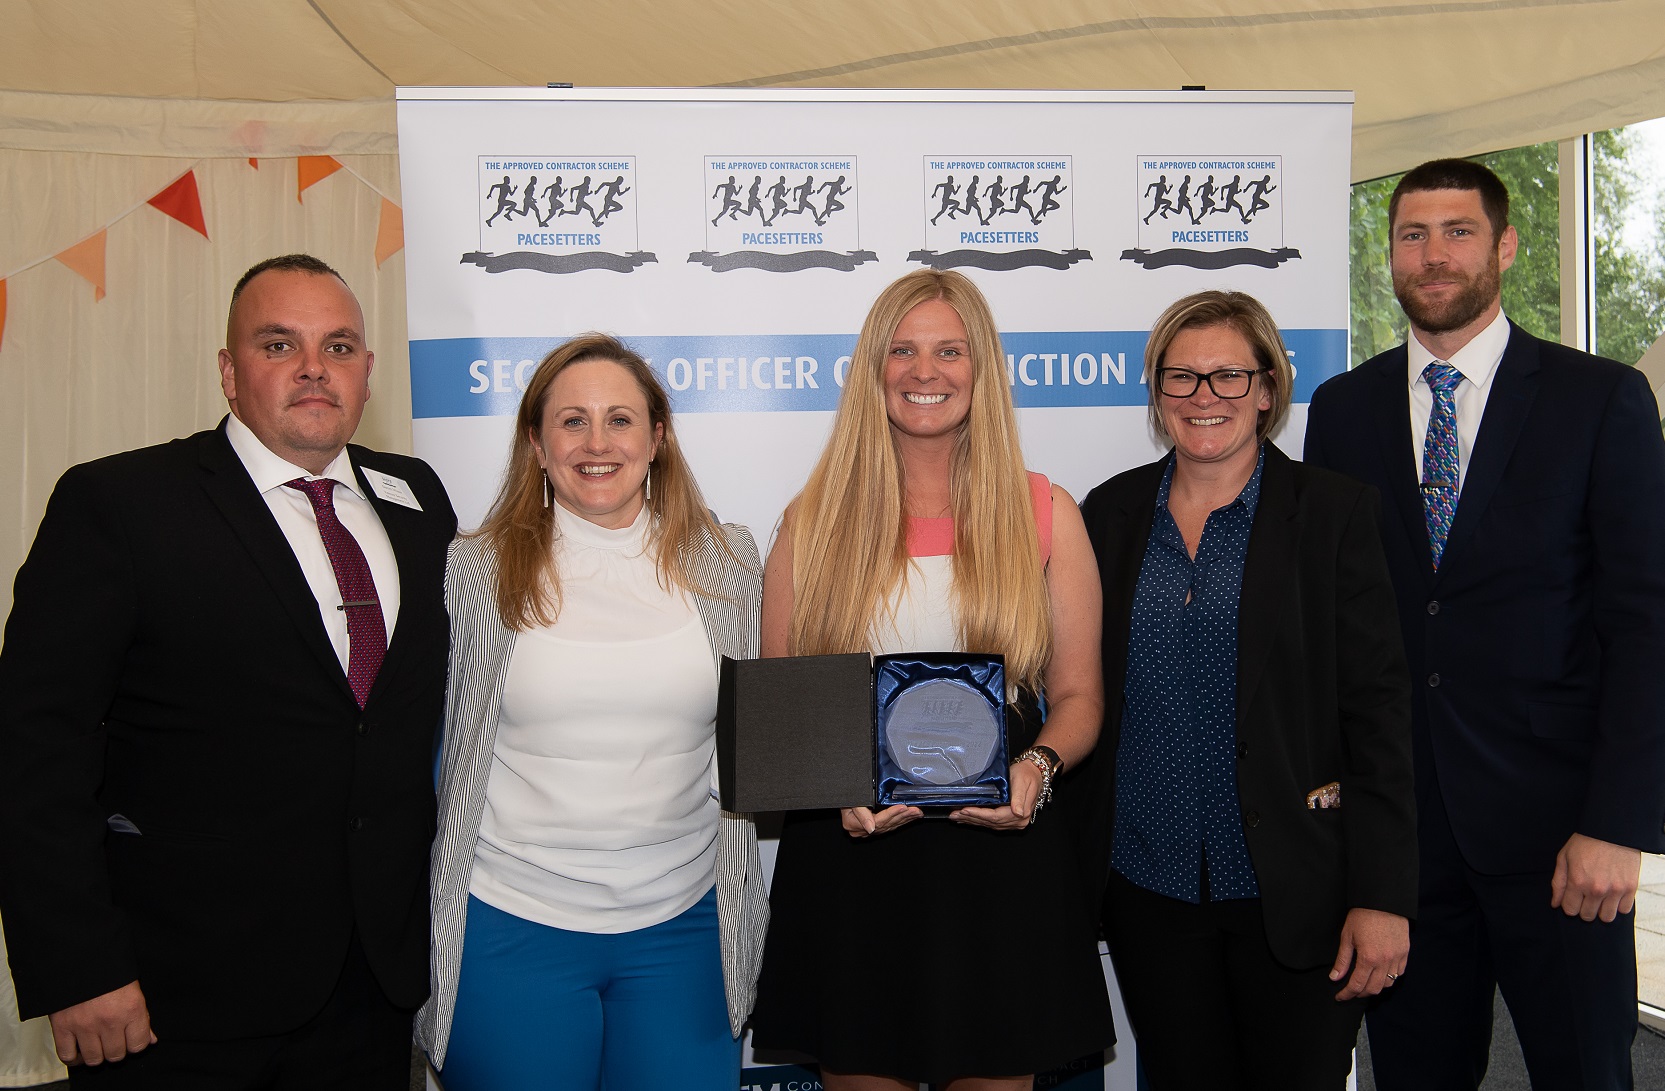 ACS Pacesetters Security Officer Distinction Awards 2022, Windsor, Berkshire, UK – 25 May 2022